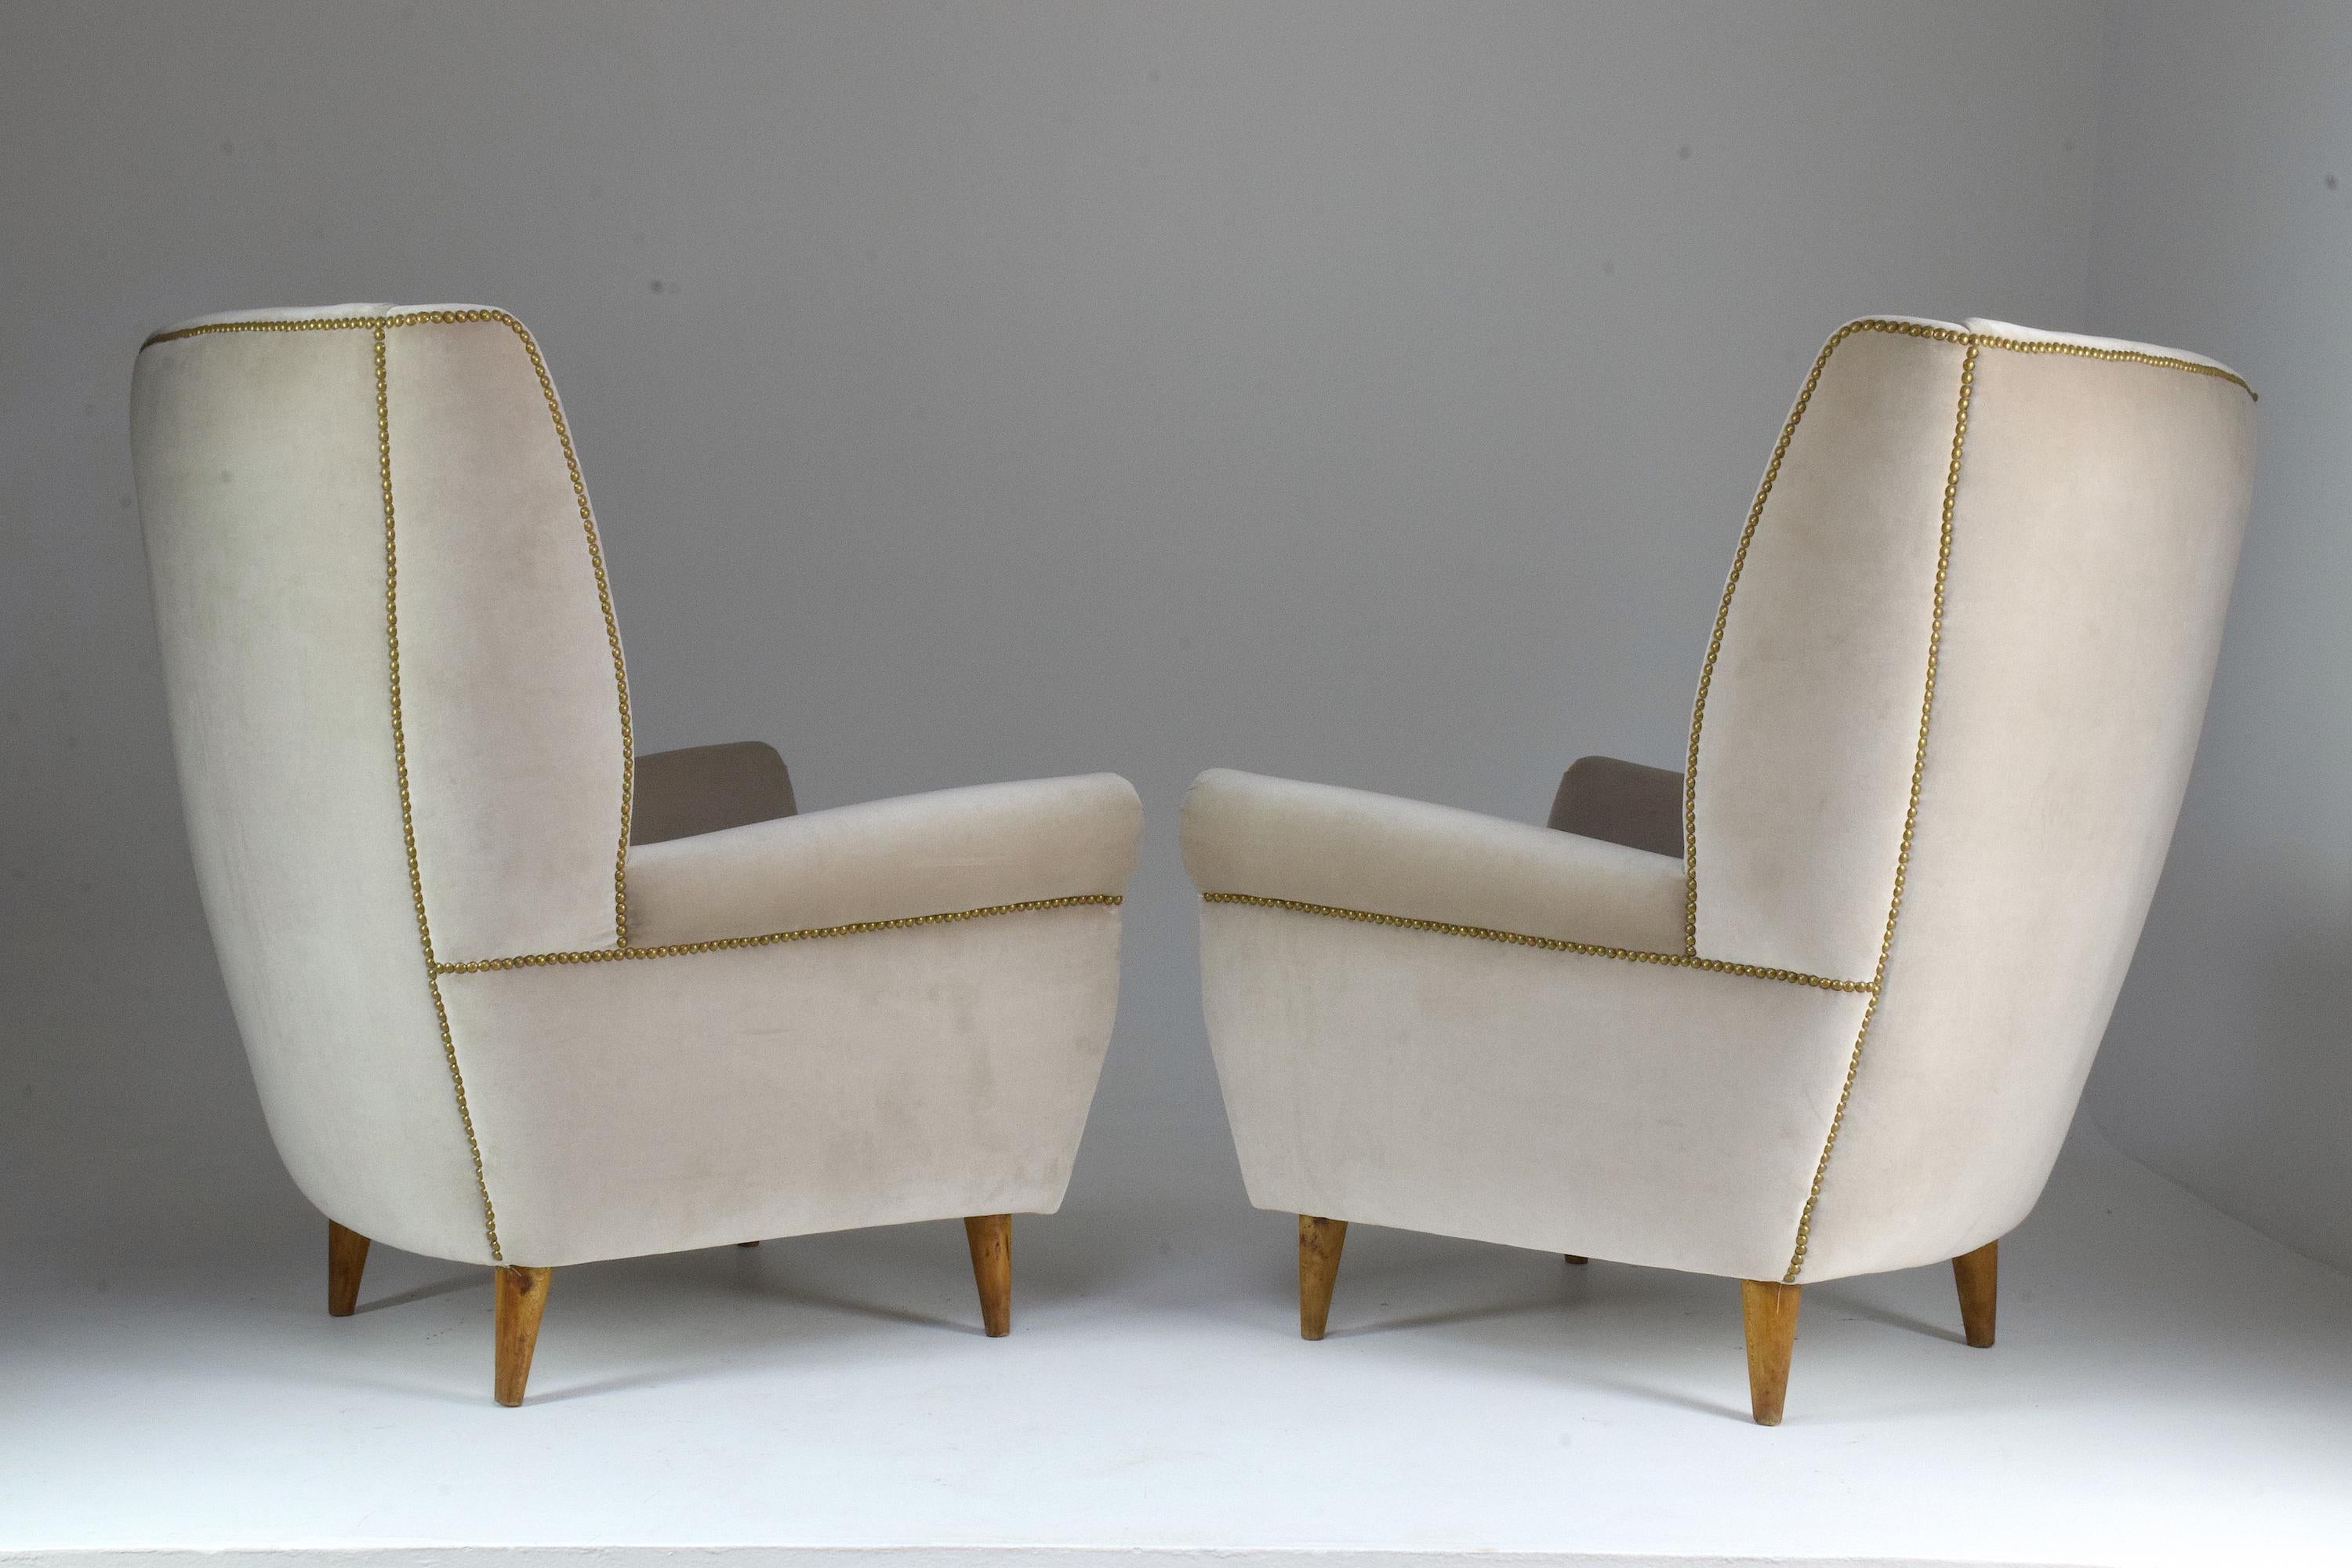 Pair of 20th Century Armchairs by Gio Ponti, 1940s For Sale 5